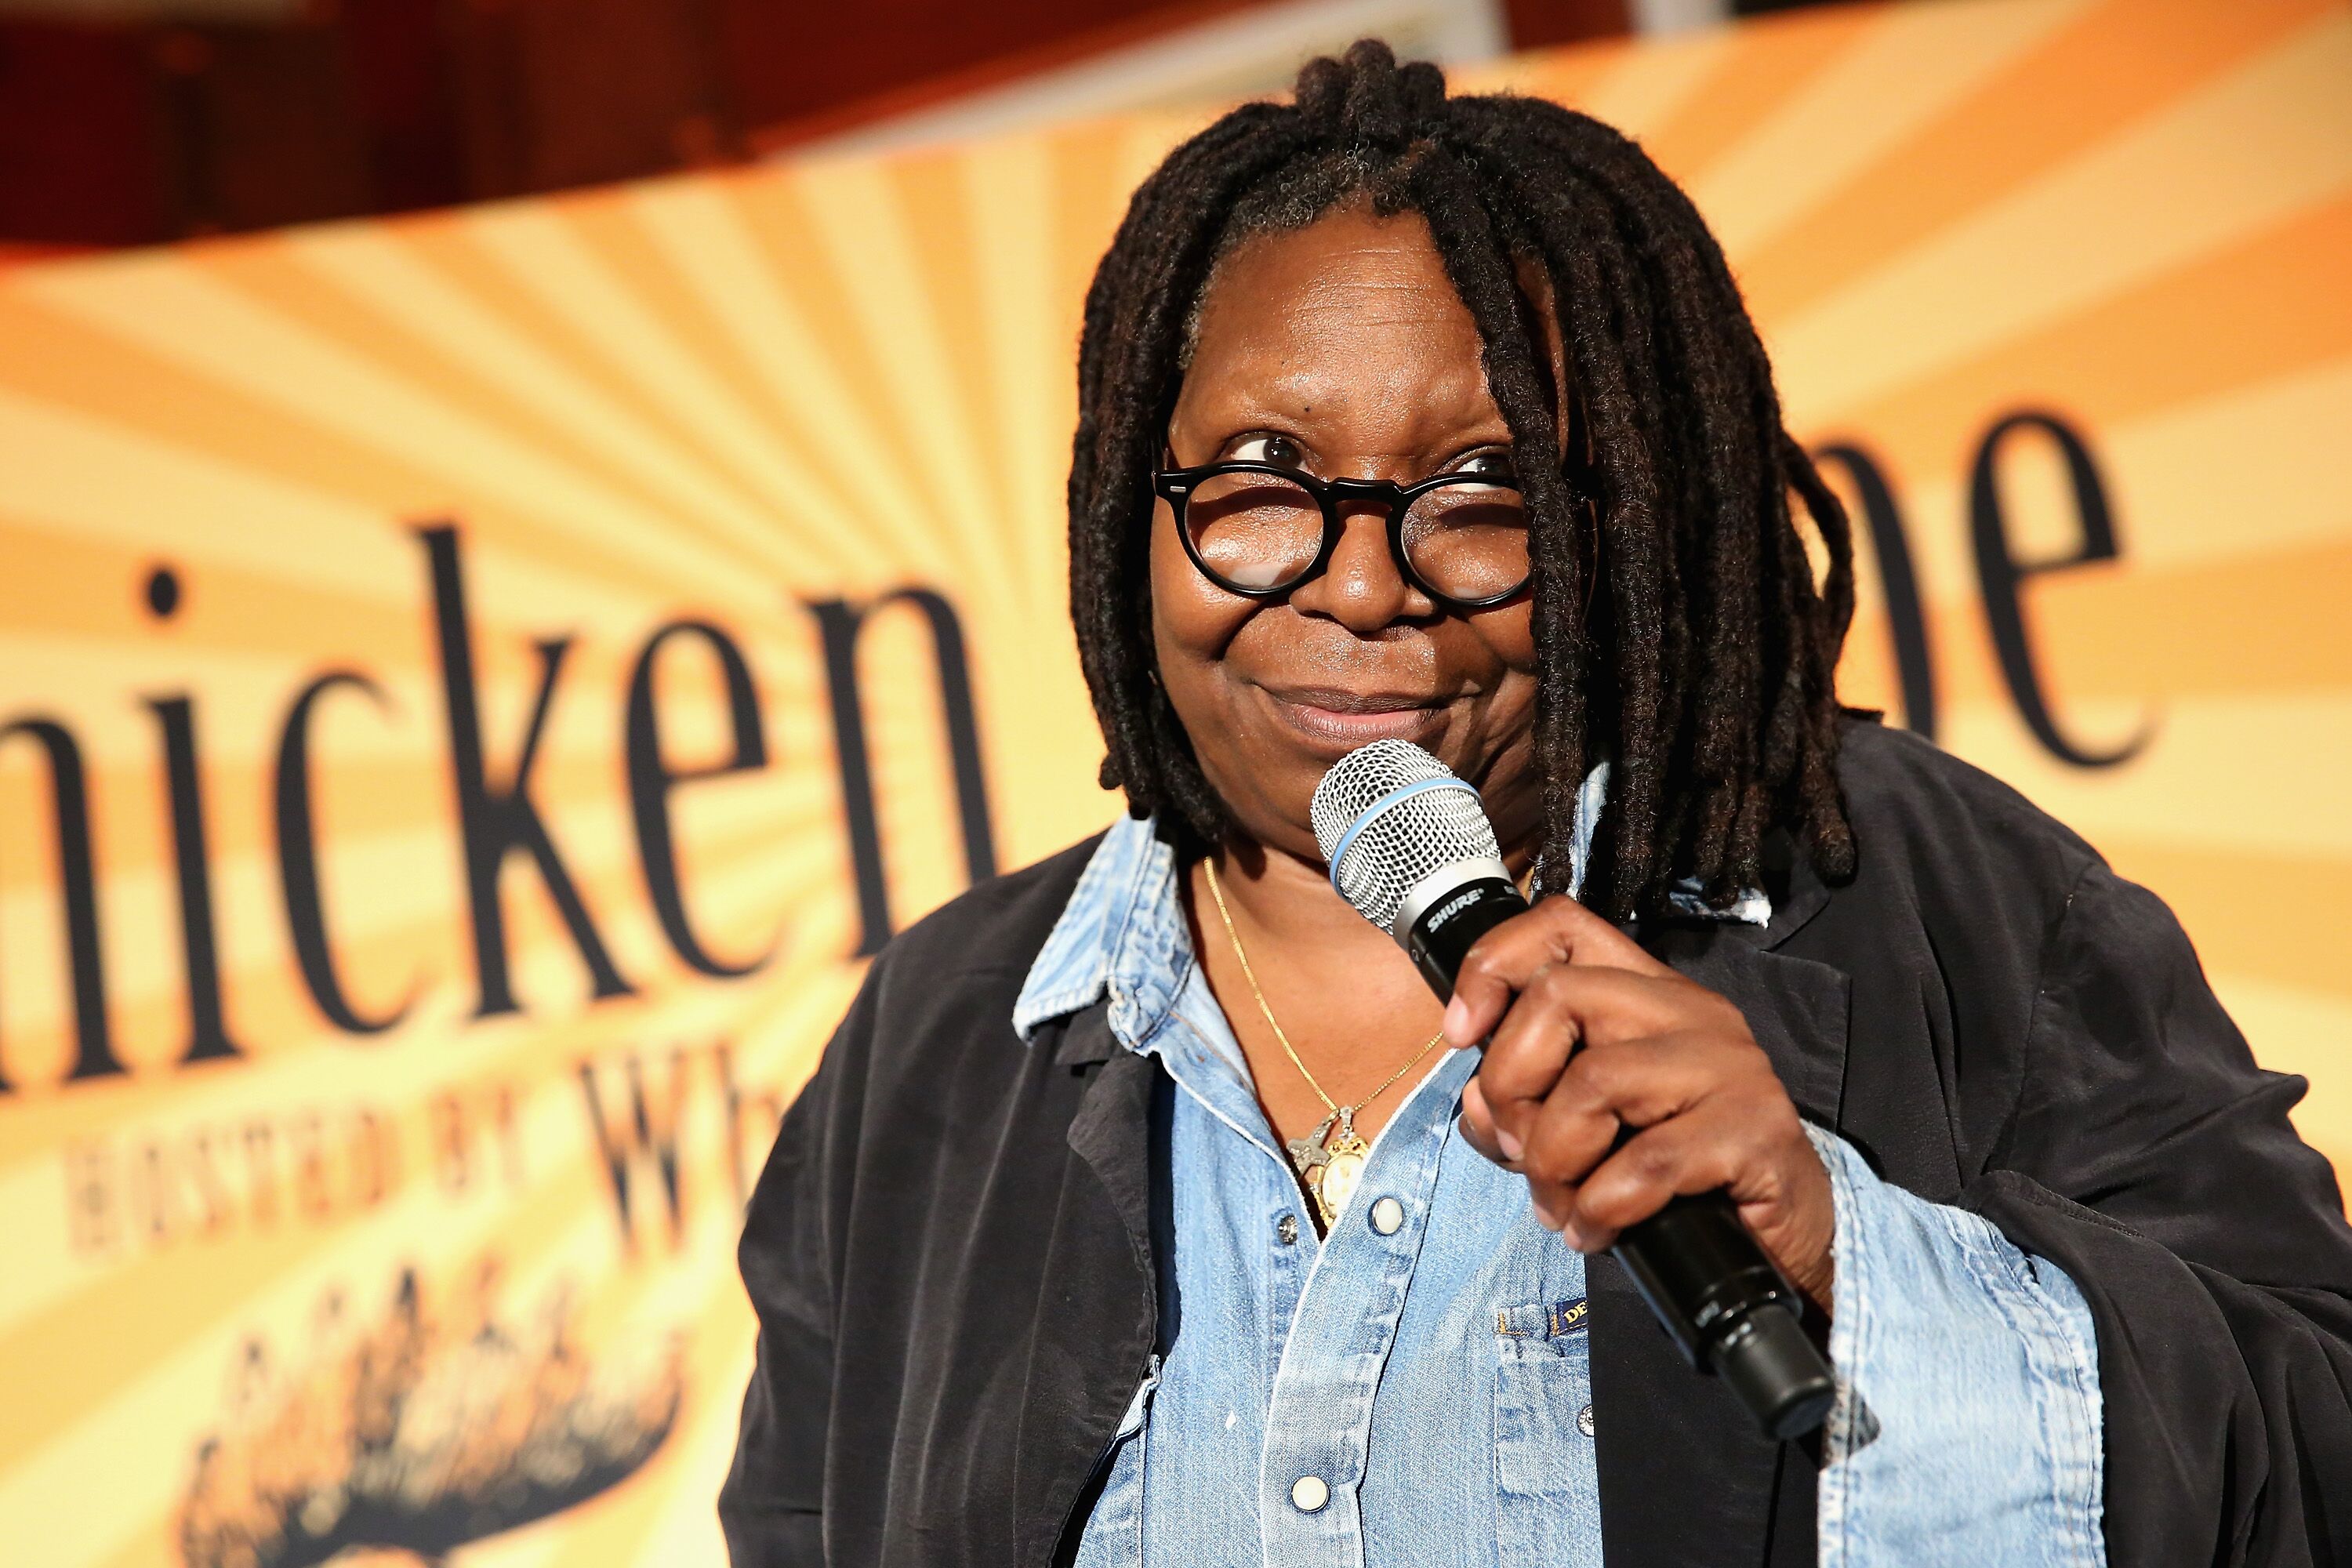 Host, actress Whoopi Goldberg, speaks at Chicken Coupe during Food Network & Cooking Channel New York City Wine & Food Festival presented by FOOD & WINE at The Loeb Boathouse on October 15, 2015 in New York City | Photo: Getty Images